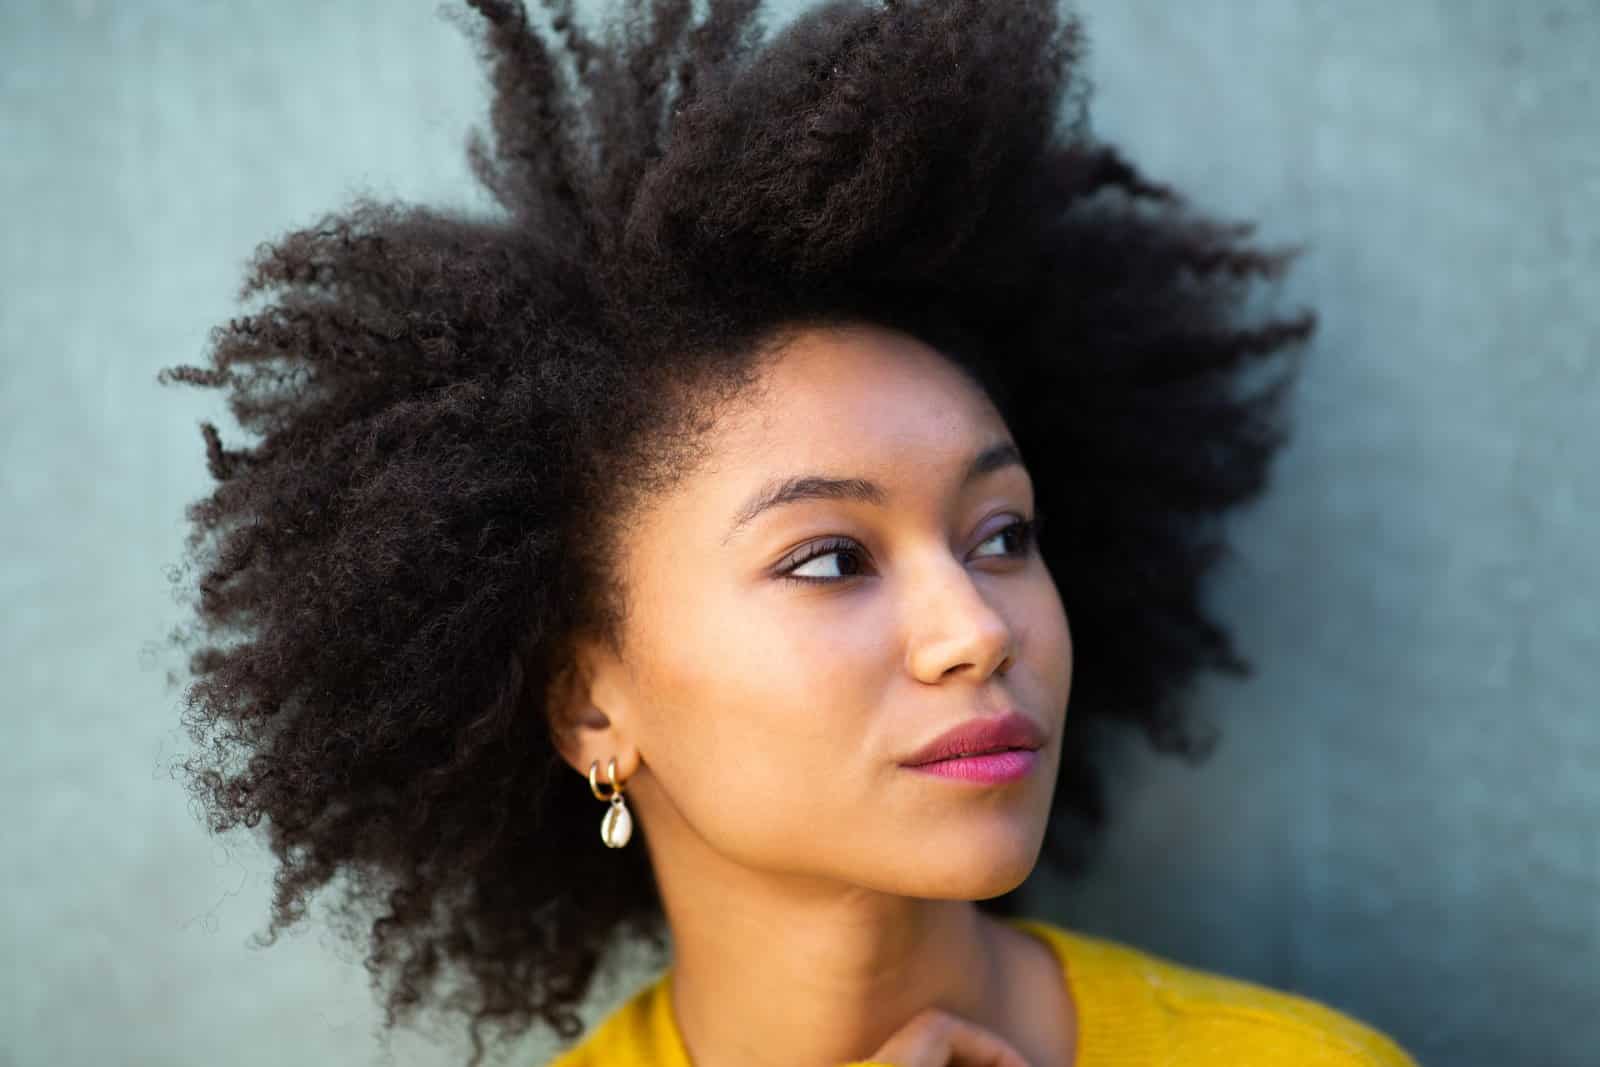 Image Credit: Shutterstock / mimagephotography <p><span>By showcasing a variety of Black women’s beauty, TV can challenge narrow beauty standards and promote inclusivity.</span></p>